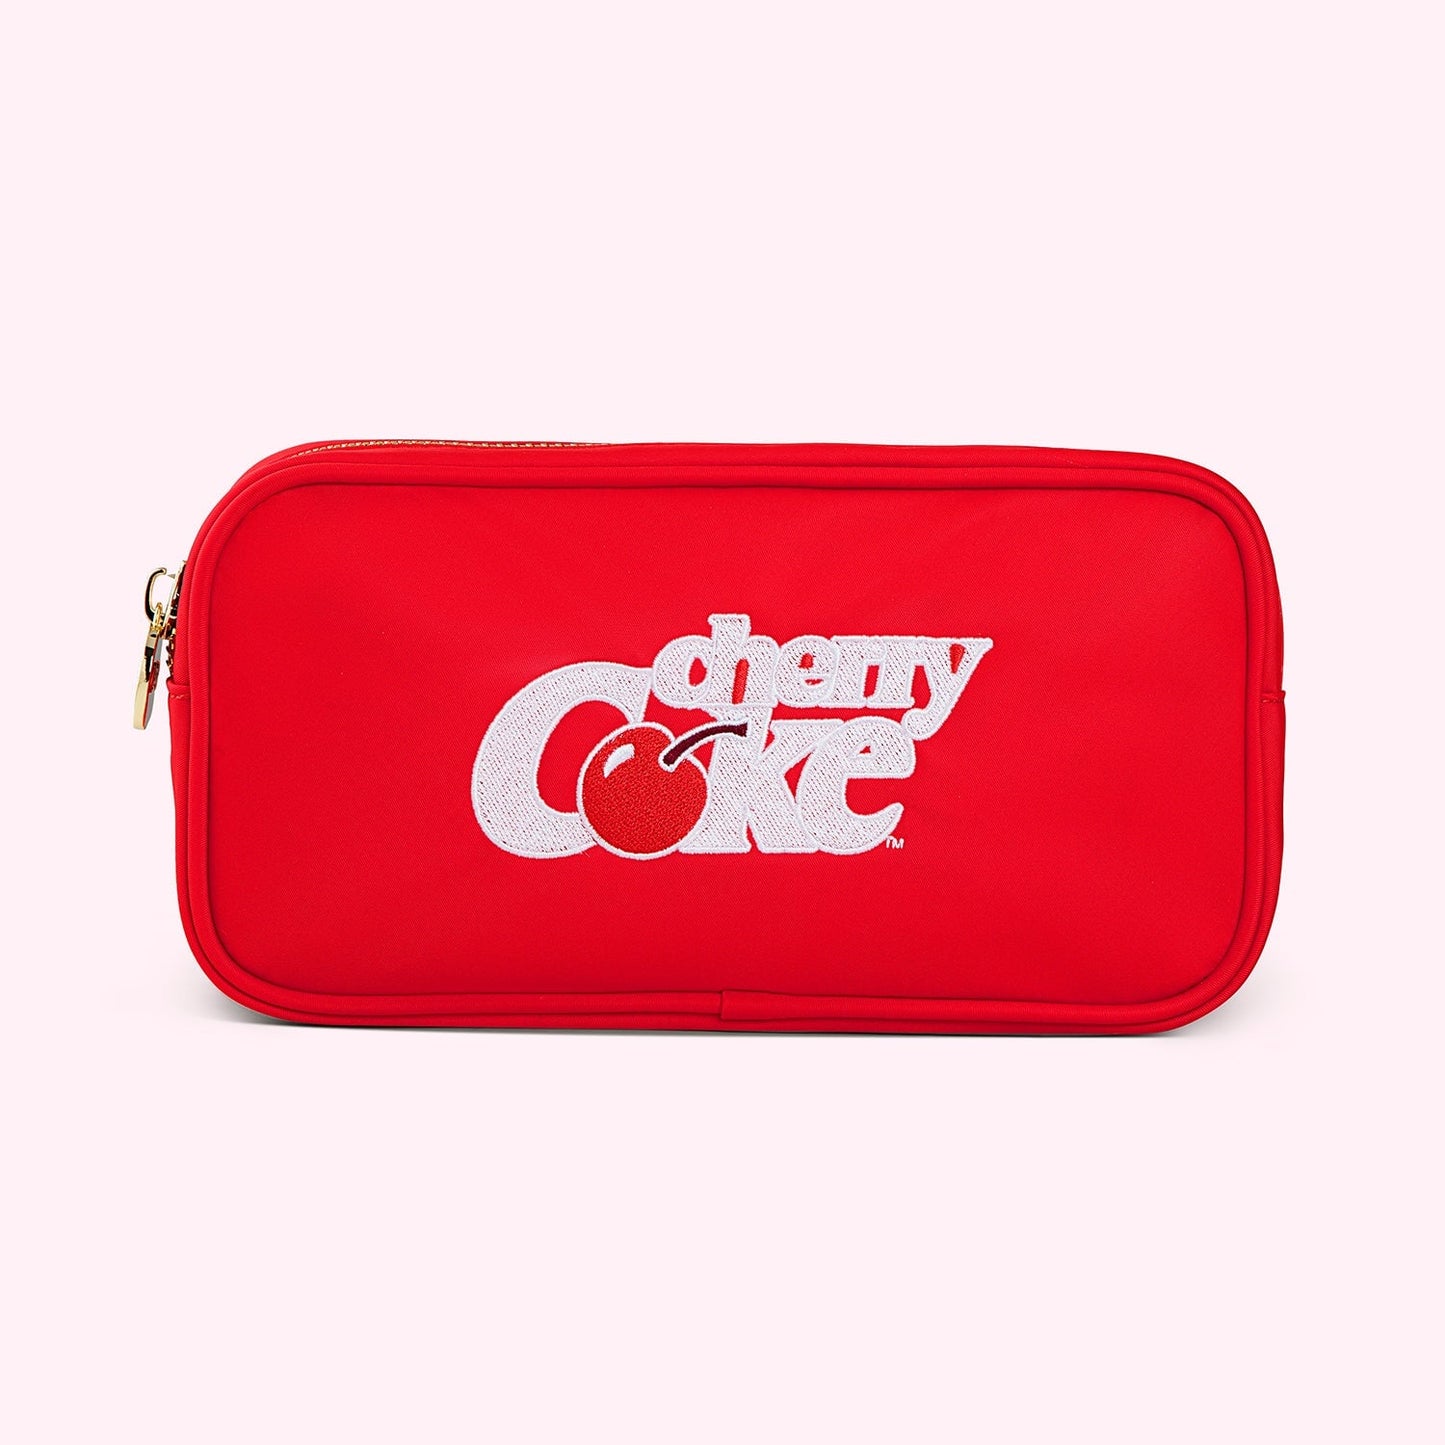 Embroidered Cherry Coke Small Pouch